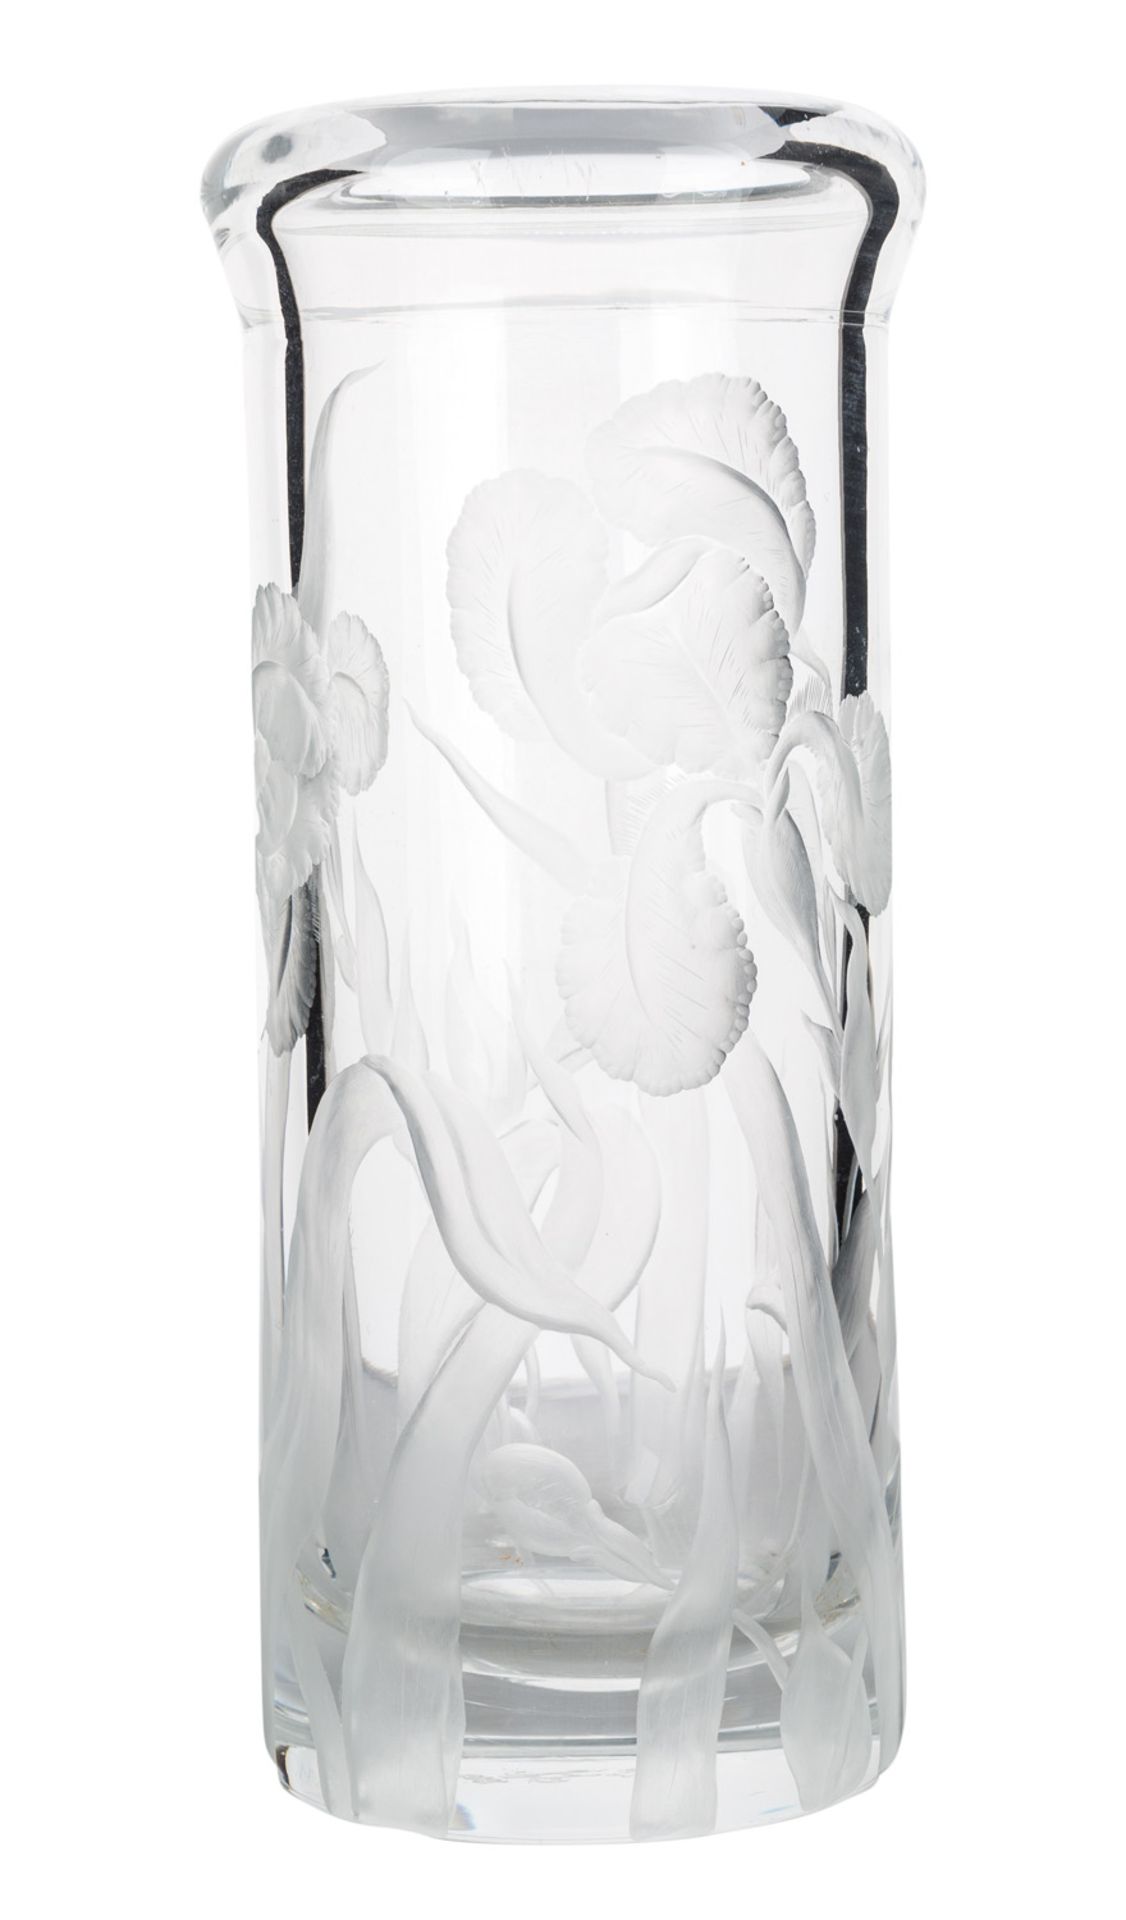 A RUSSIAN GLASS VASE, IMPERIAL GLASS MANUFACTORY, 1909